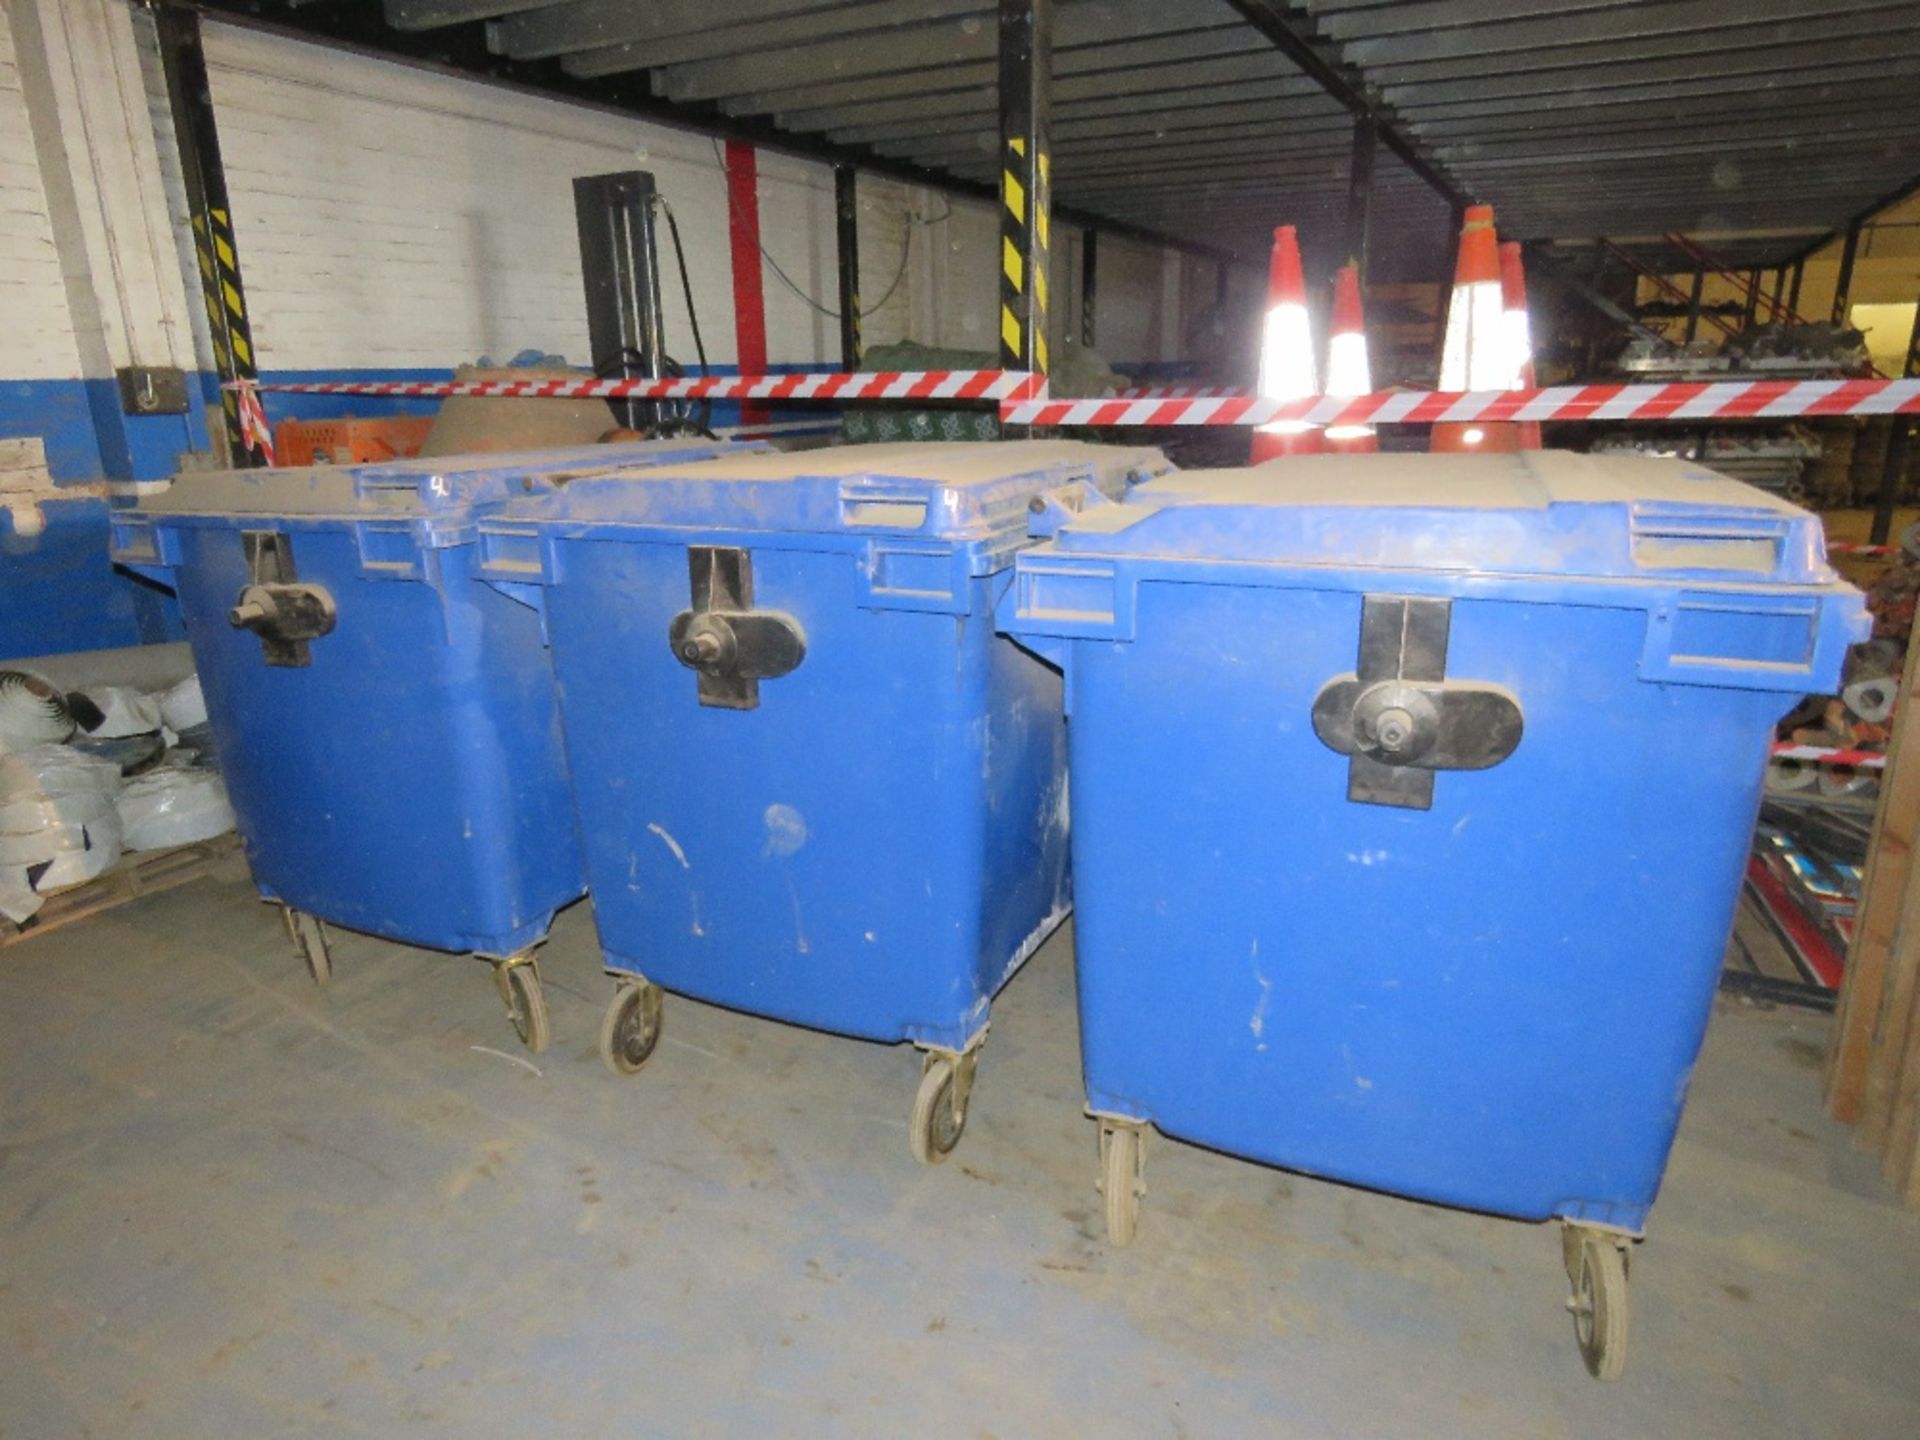 3 X LARGE BLUE WASTE BINS CONTAINING SAND PAPER. LOT LOCATION: SS13 1EF, BASILDON, ESSEX.